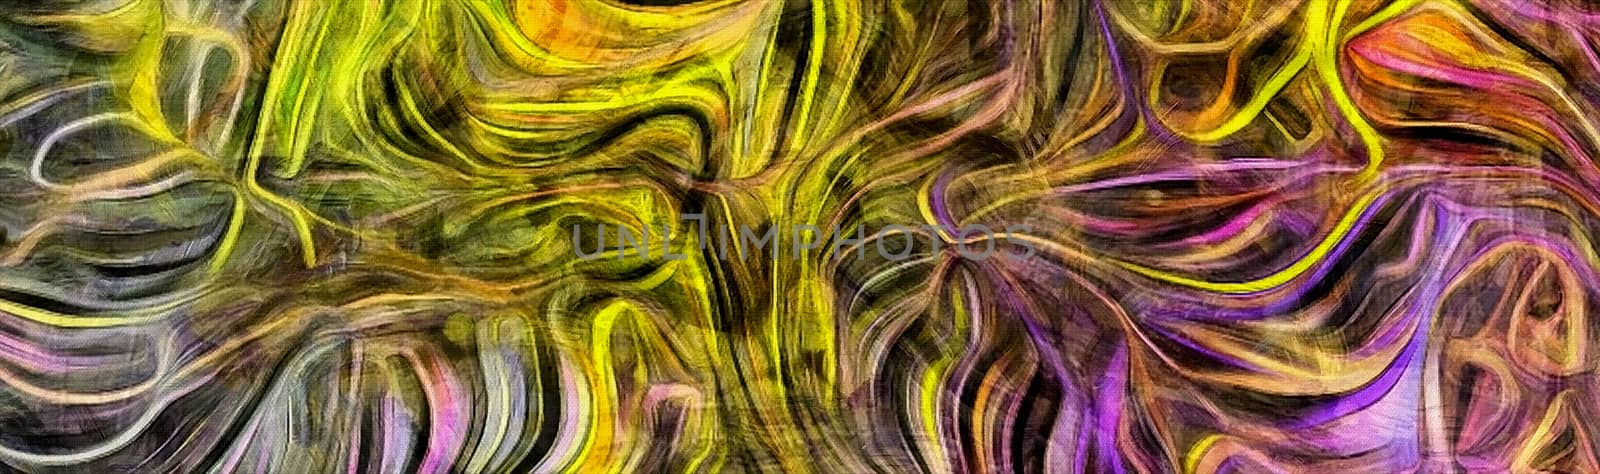 Fluid lines of color movement by applesstock